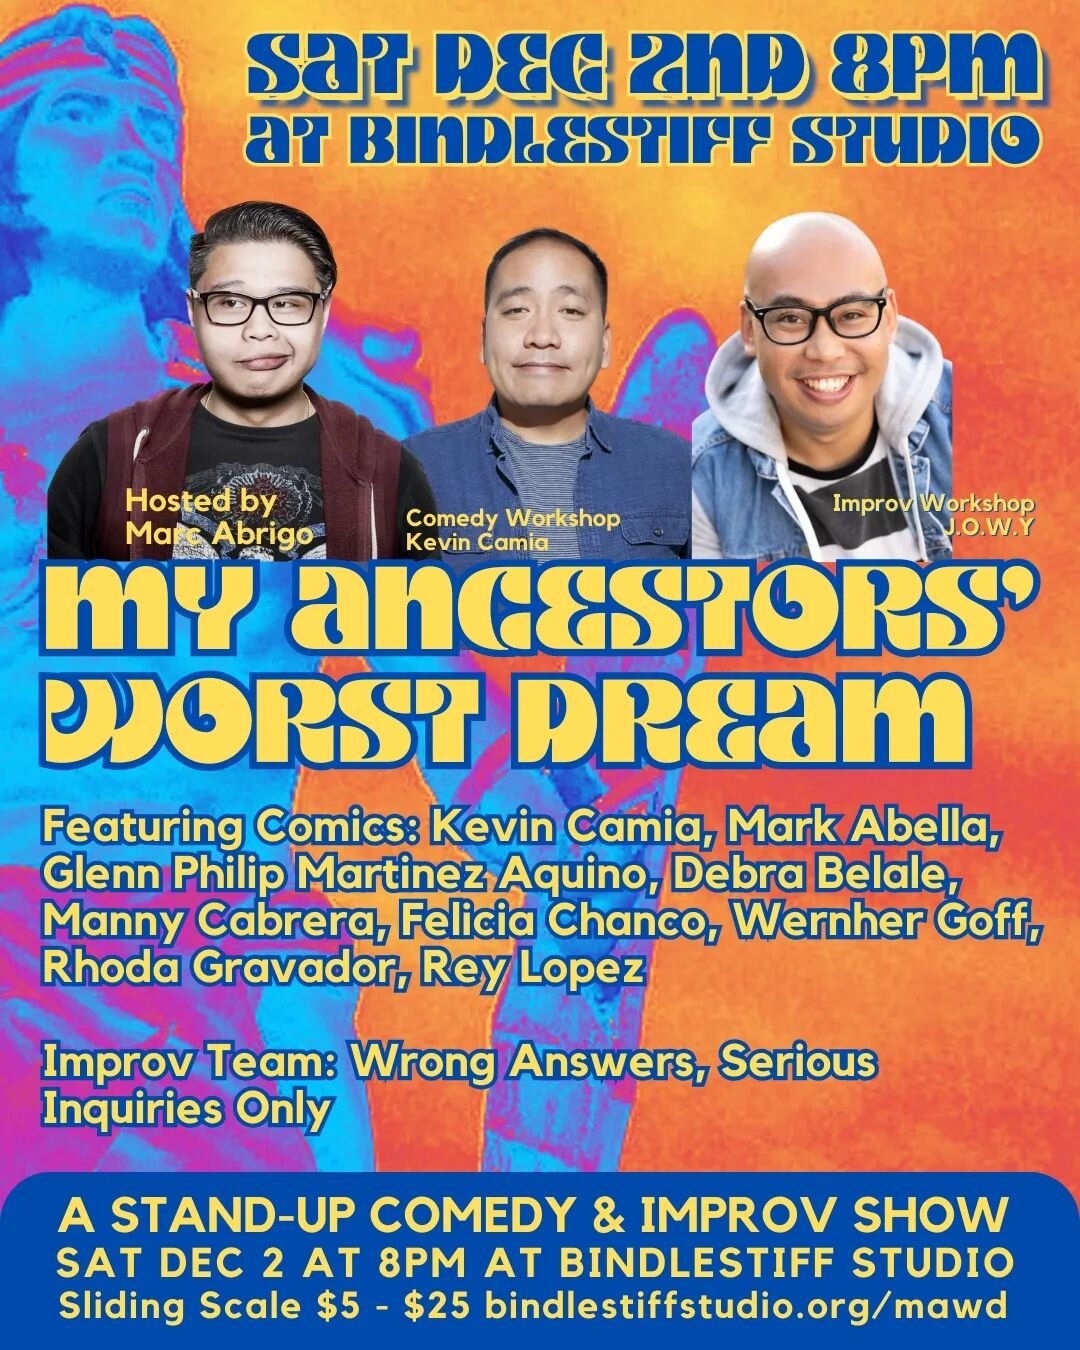 COMING THIS SATURDAY, DEC 2ND! Buy tickets at the Link in Bio!!!

My Ancestors&rsquo; Worst Dream: A Stand-Up Comedy and Improv Showcase

Sat, Dec 2, 2023 at 8pm
Sliding Scale $5-25
Buy Tickets: bindlestiffstudio.org/mawd
Hosted by Marc Abrigo

Featu